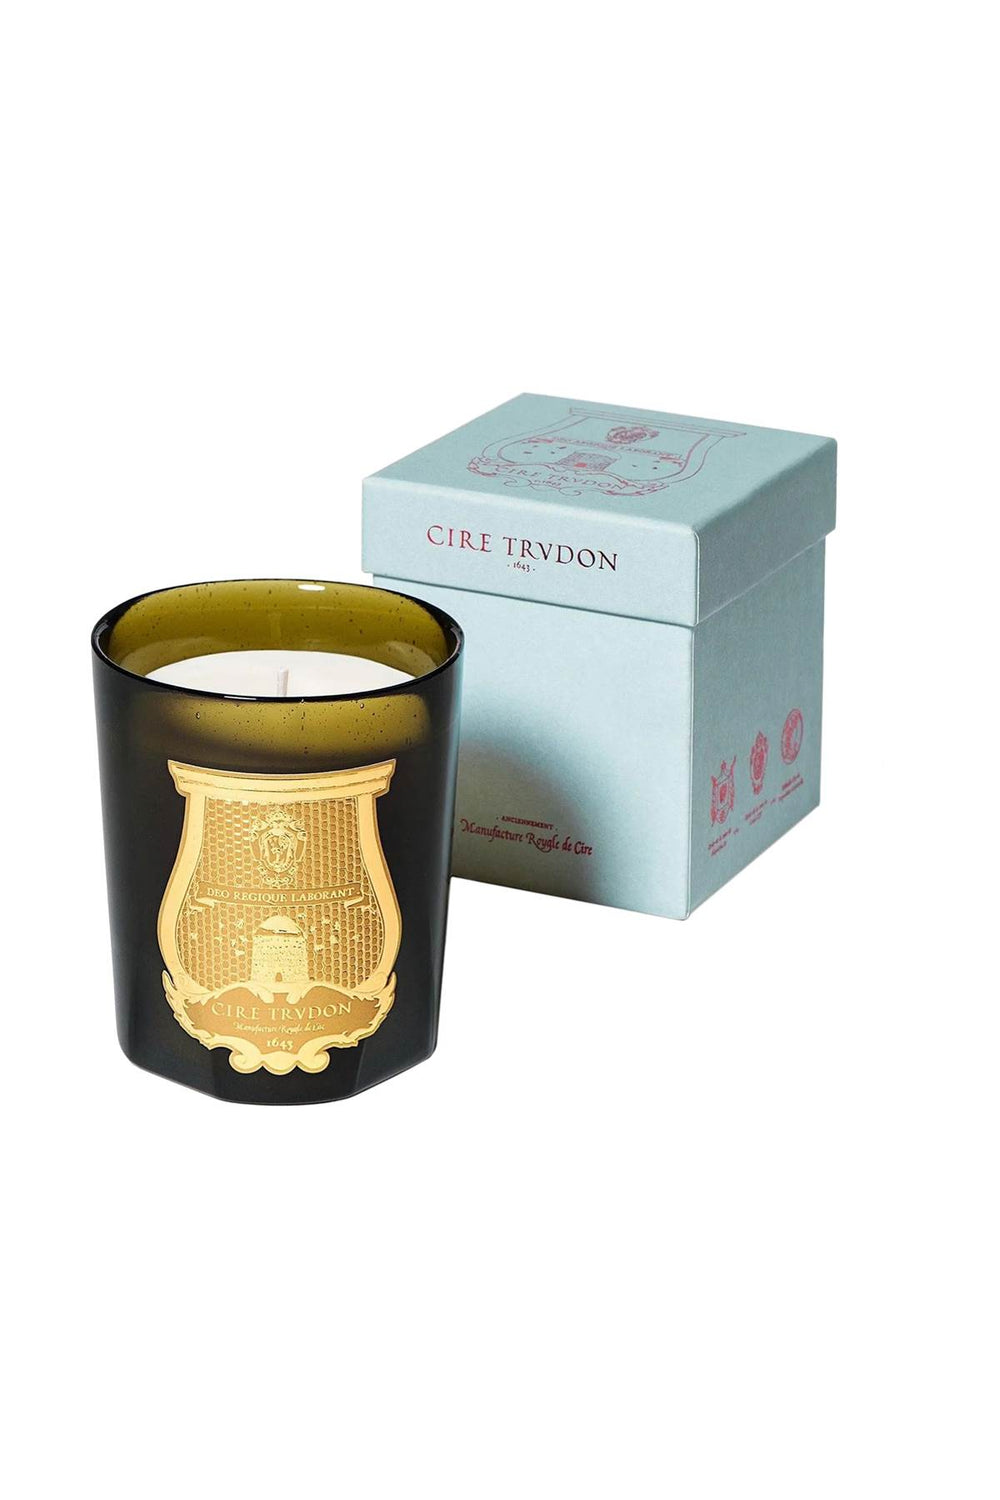 Cire trvdon scented candle "holy spirit" --1